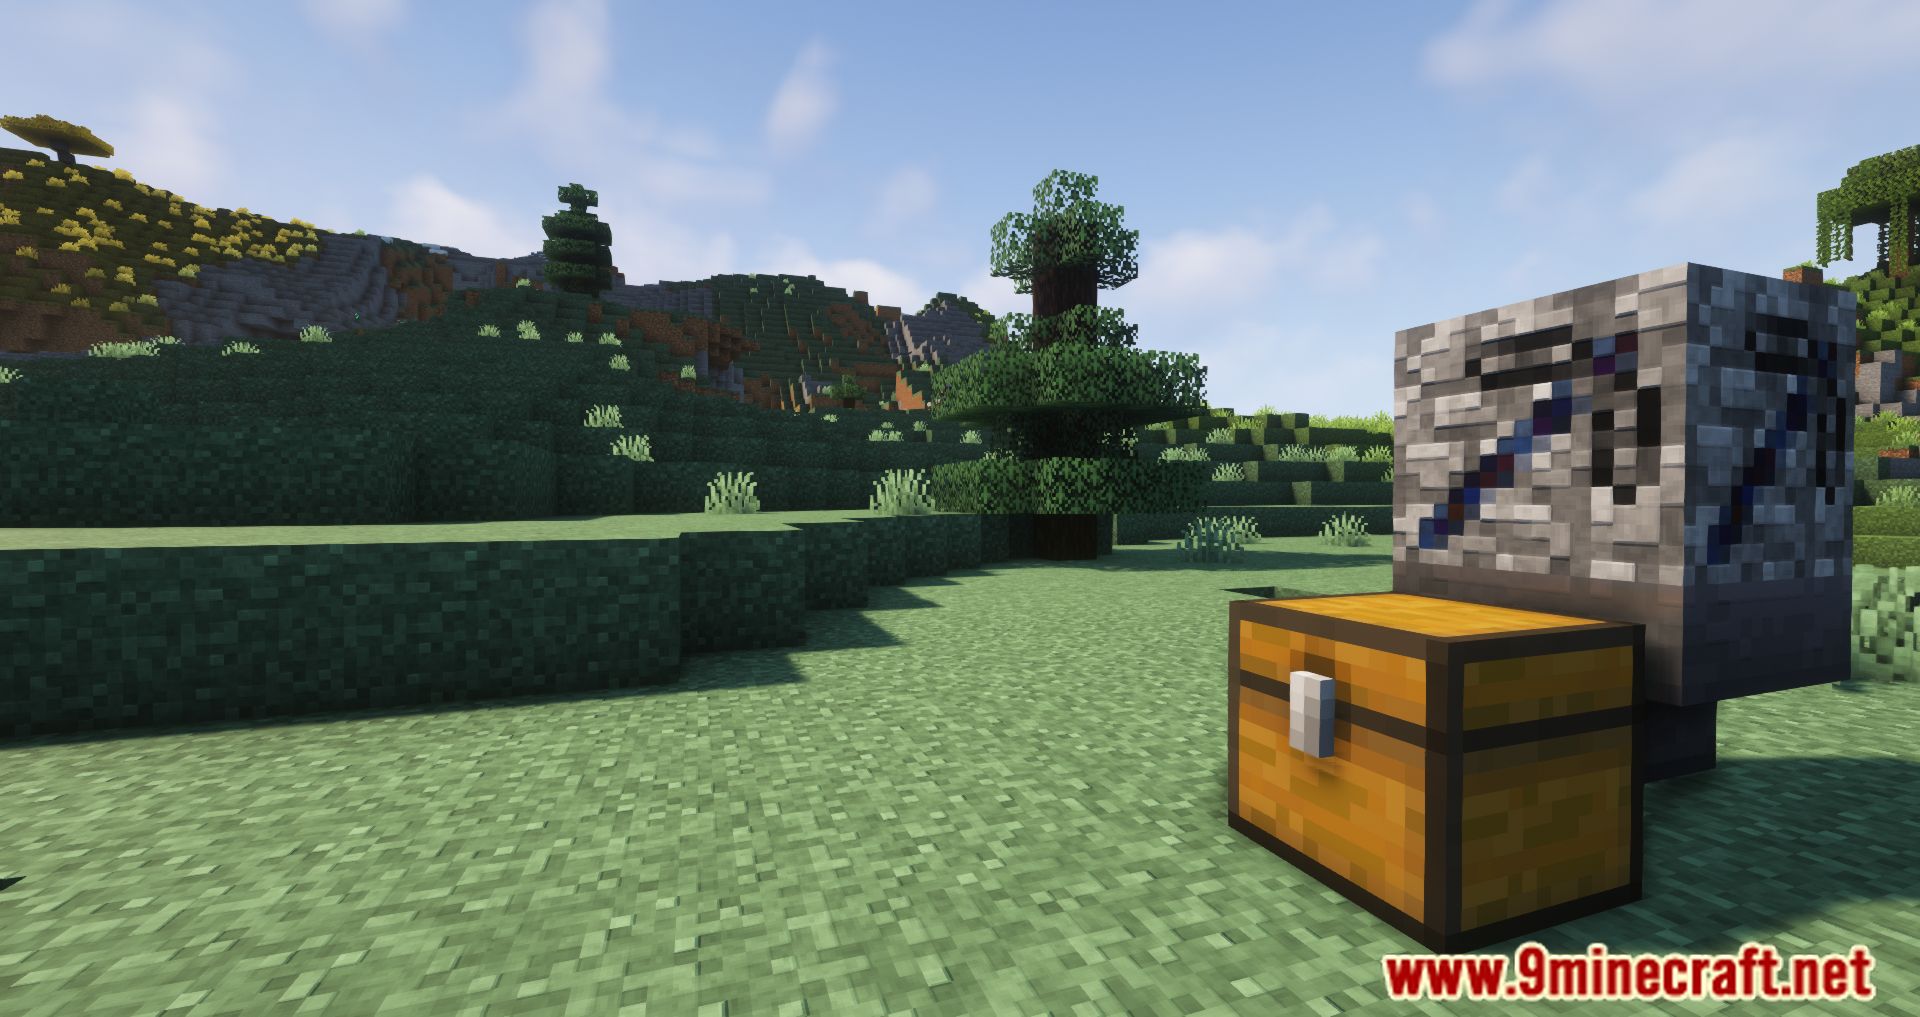 Simple Cobblestone Generator Mod (1.20.4, 1.19.4) - A New Feature Added To The Game 7